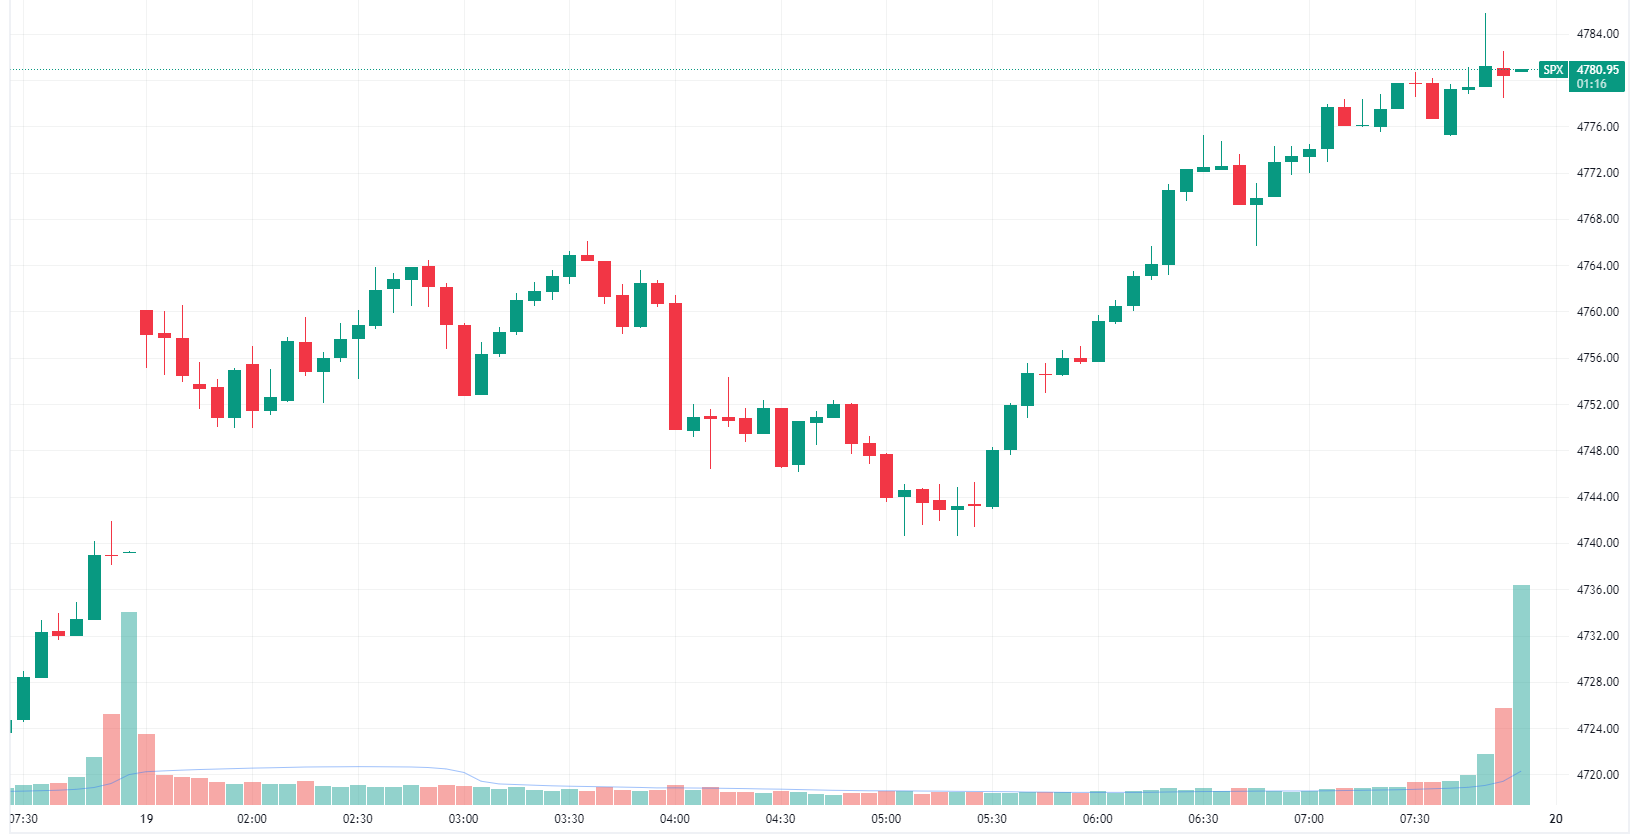 S&P 500 higher, closed near best levels (Source: TradingView)